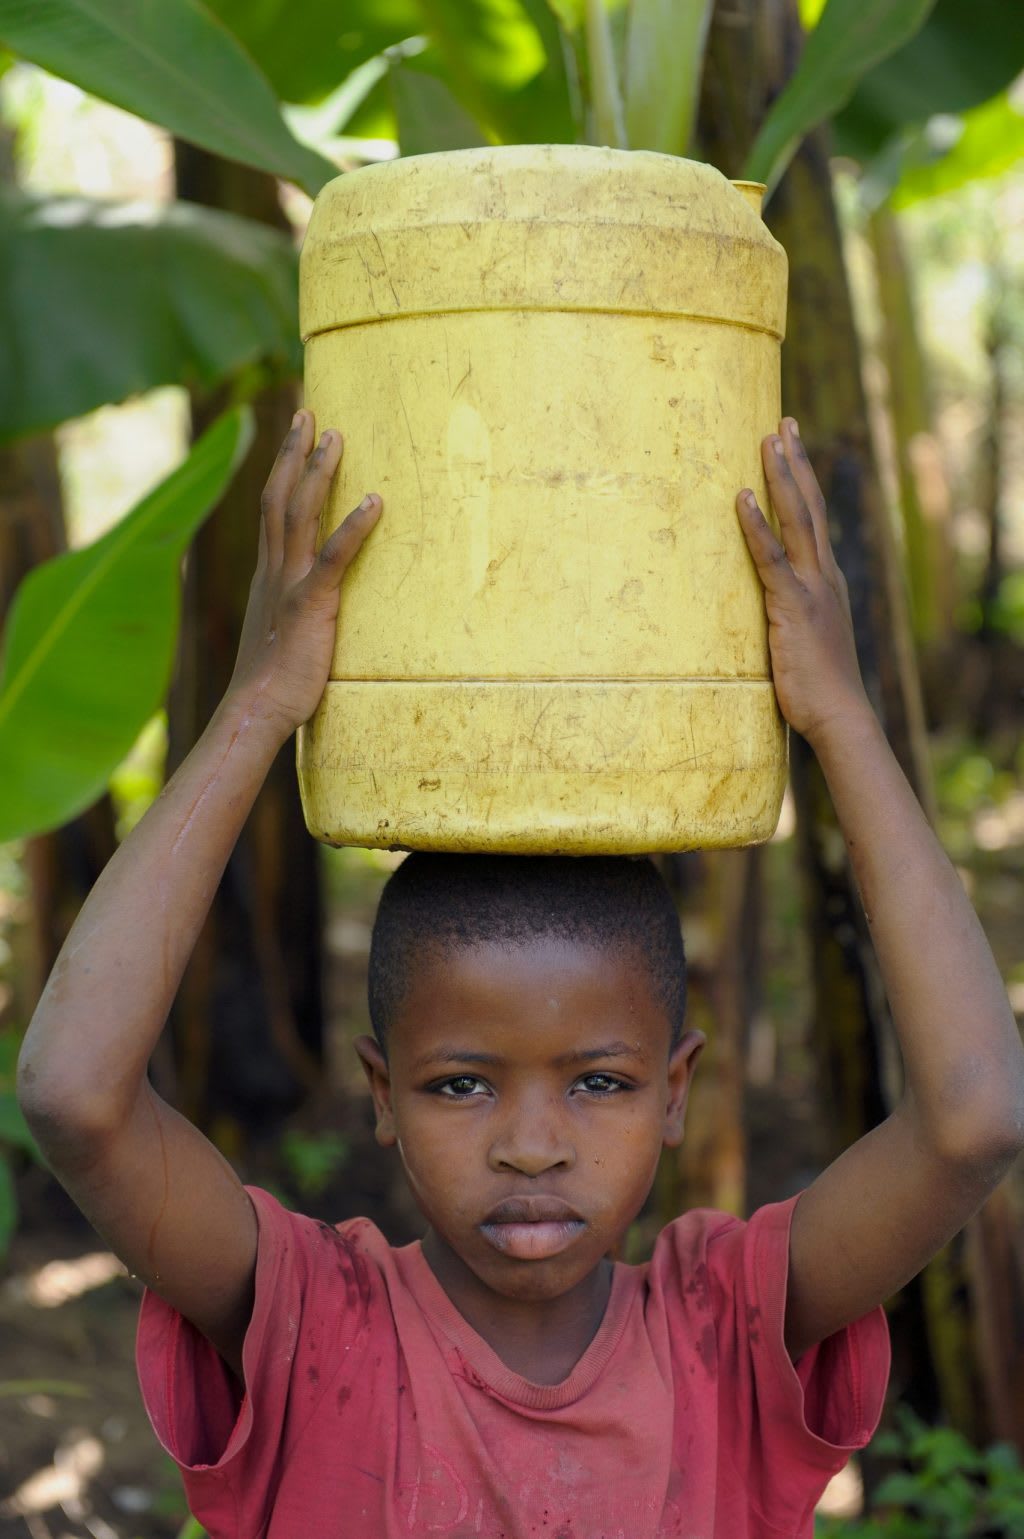 A young black boy holds a yellow water container on his head